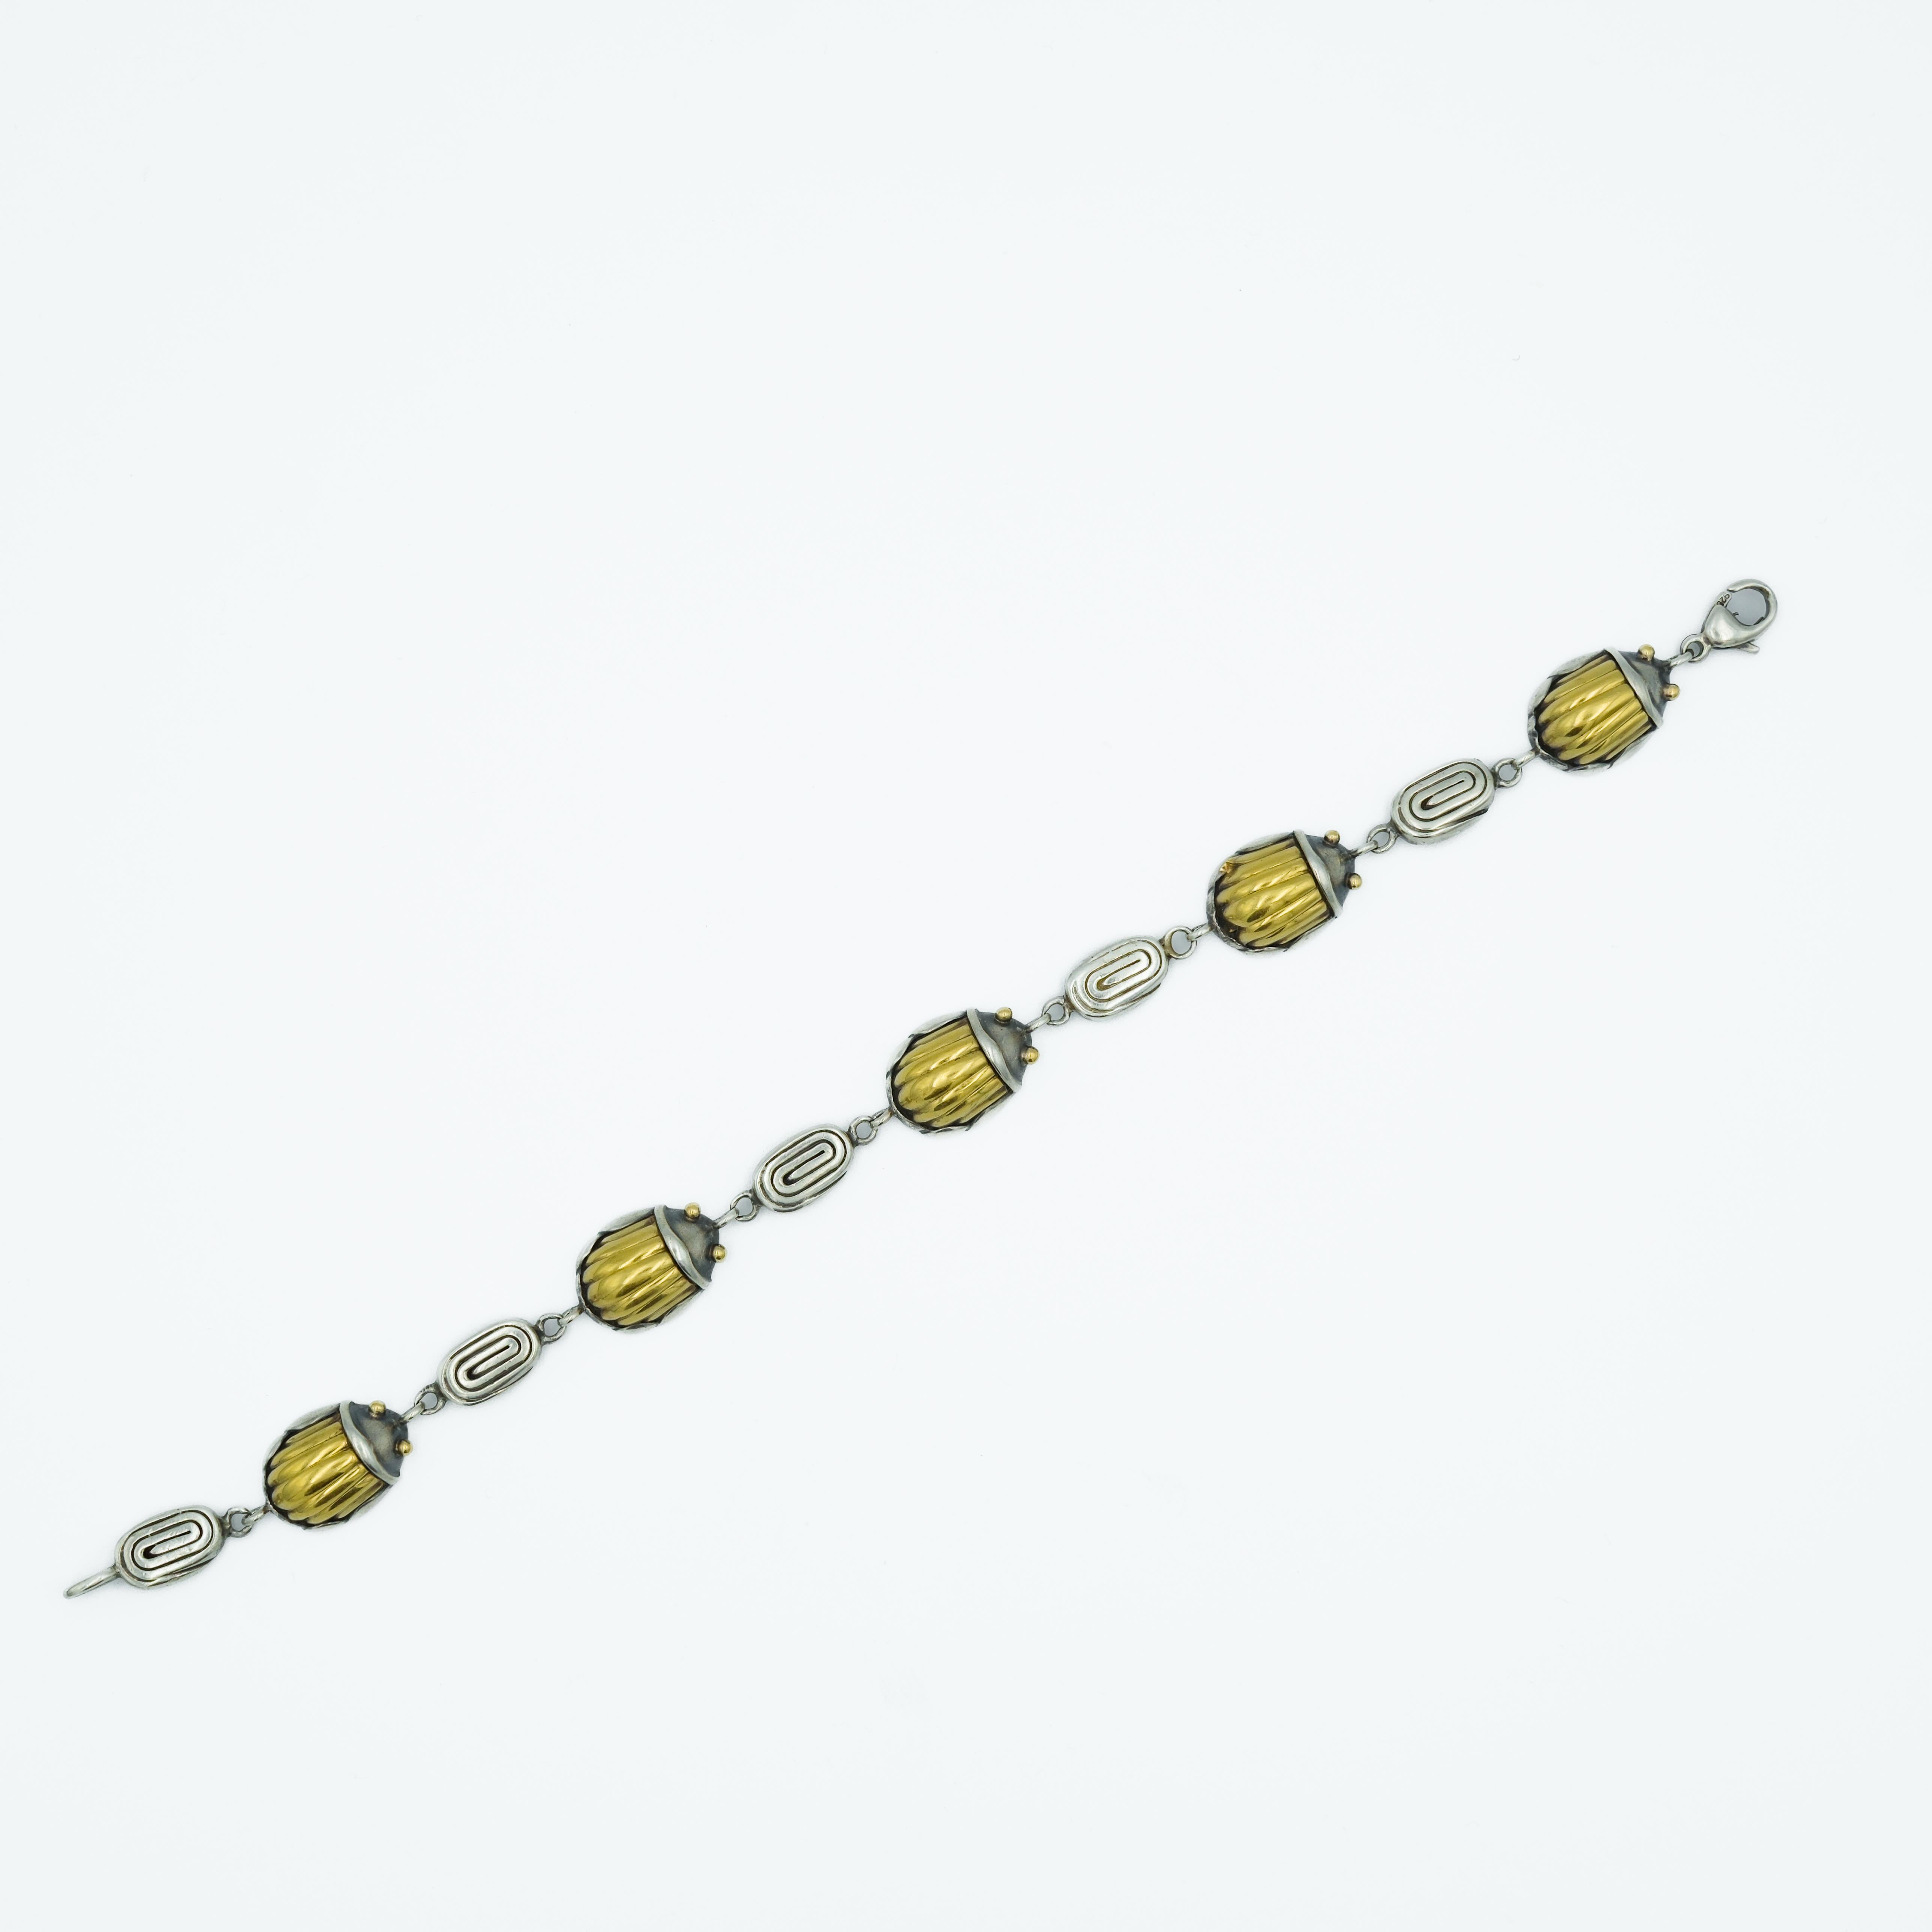 This Tiffany & Co. bracelet, created in 1993, is a distinguished piece that reflects the company's timeless elegance combined with the cultural influences of the early 1990s. Crafted from 925 sterling silver and accented with 18k yellow gold, the